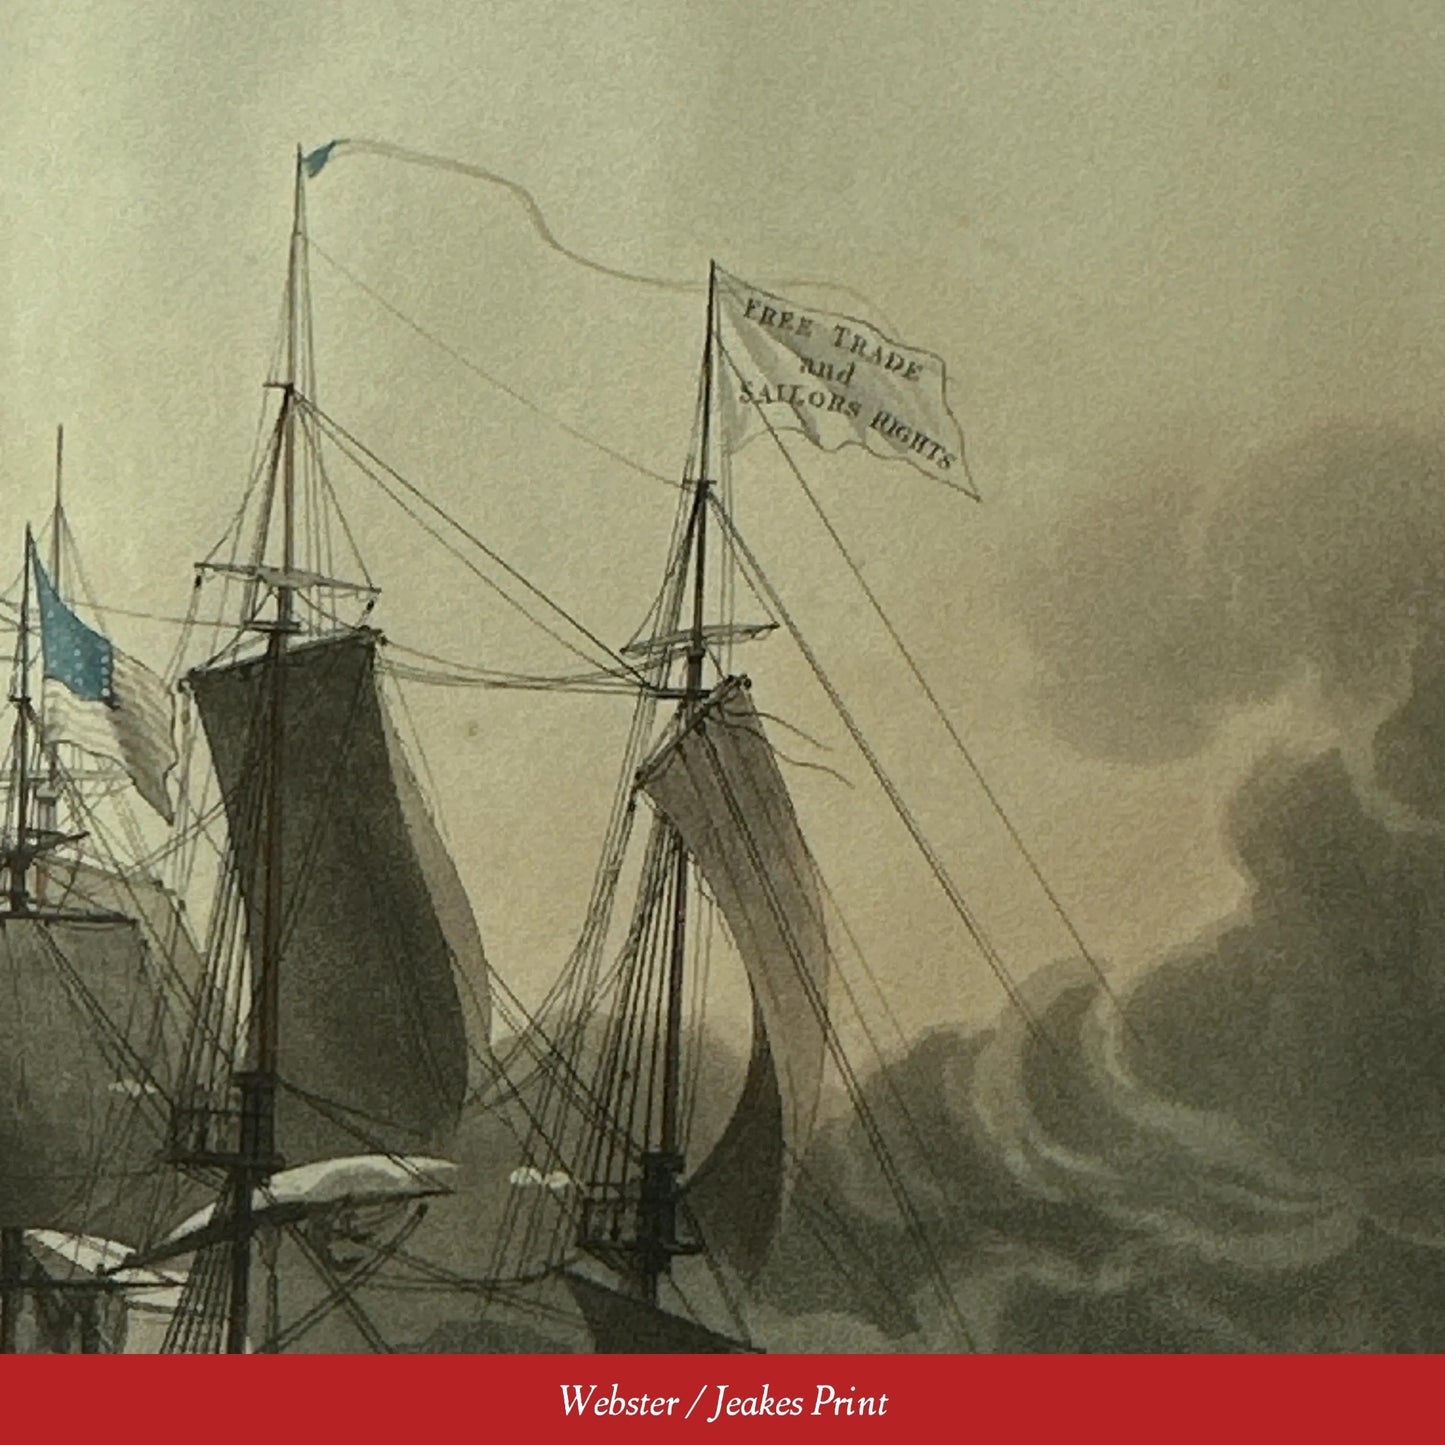 Battle of Boston Harbor with the Frigates Chesapeake and Shannon — 1813 — Two historic framed prints